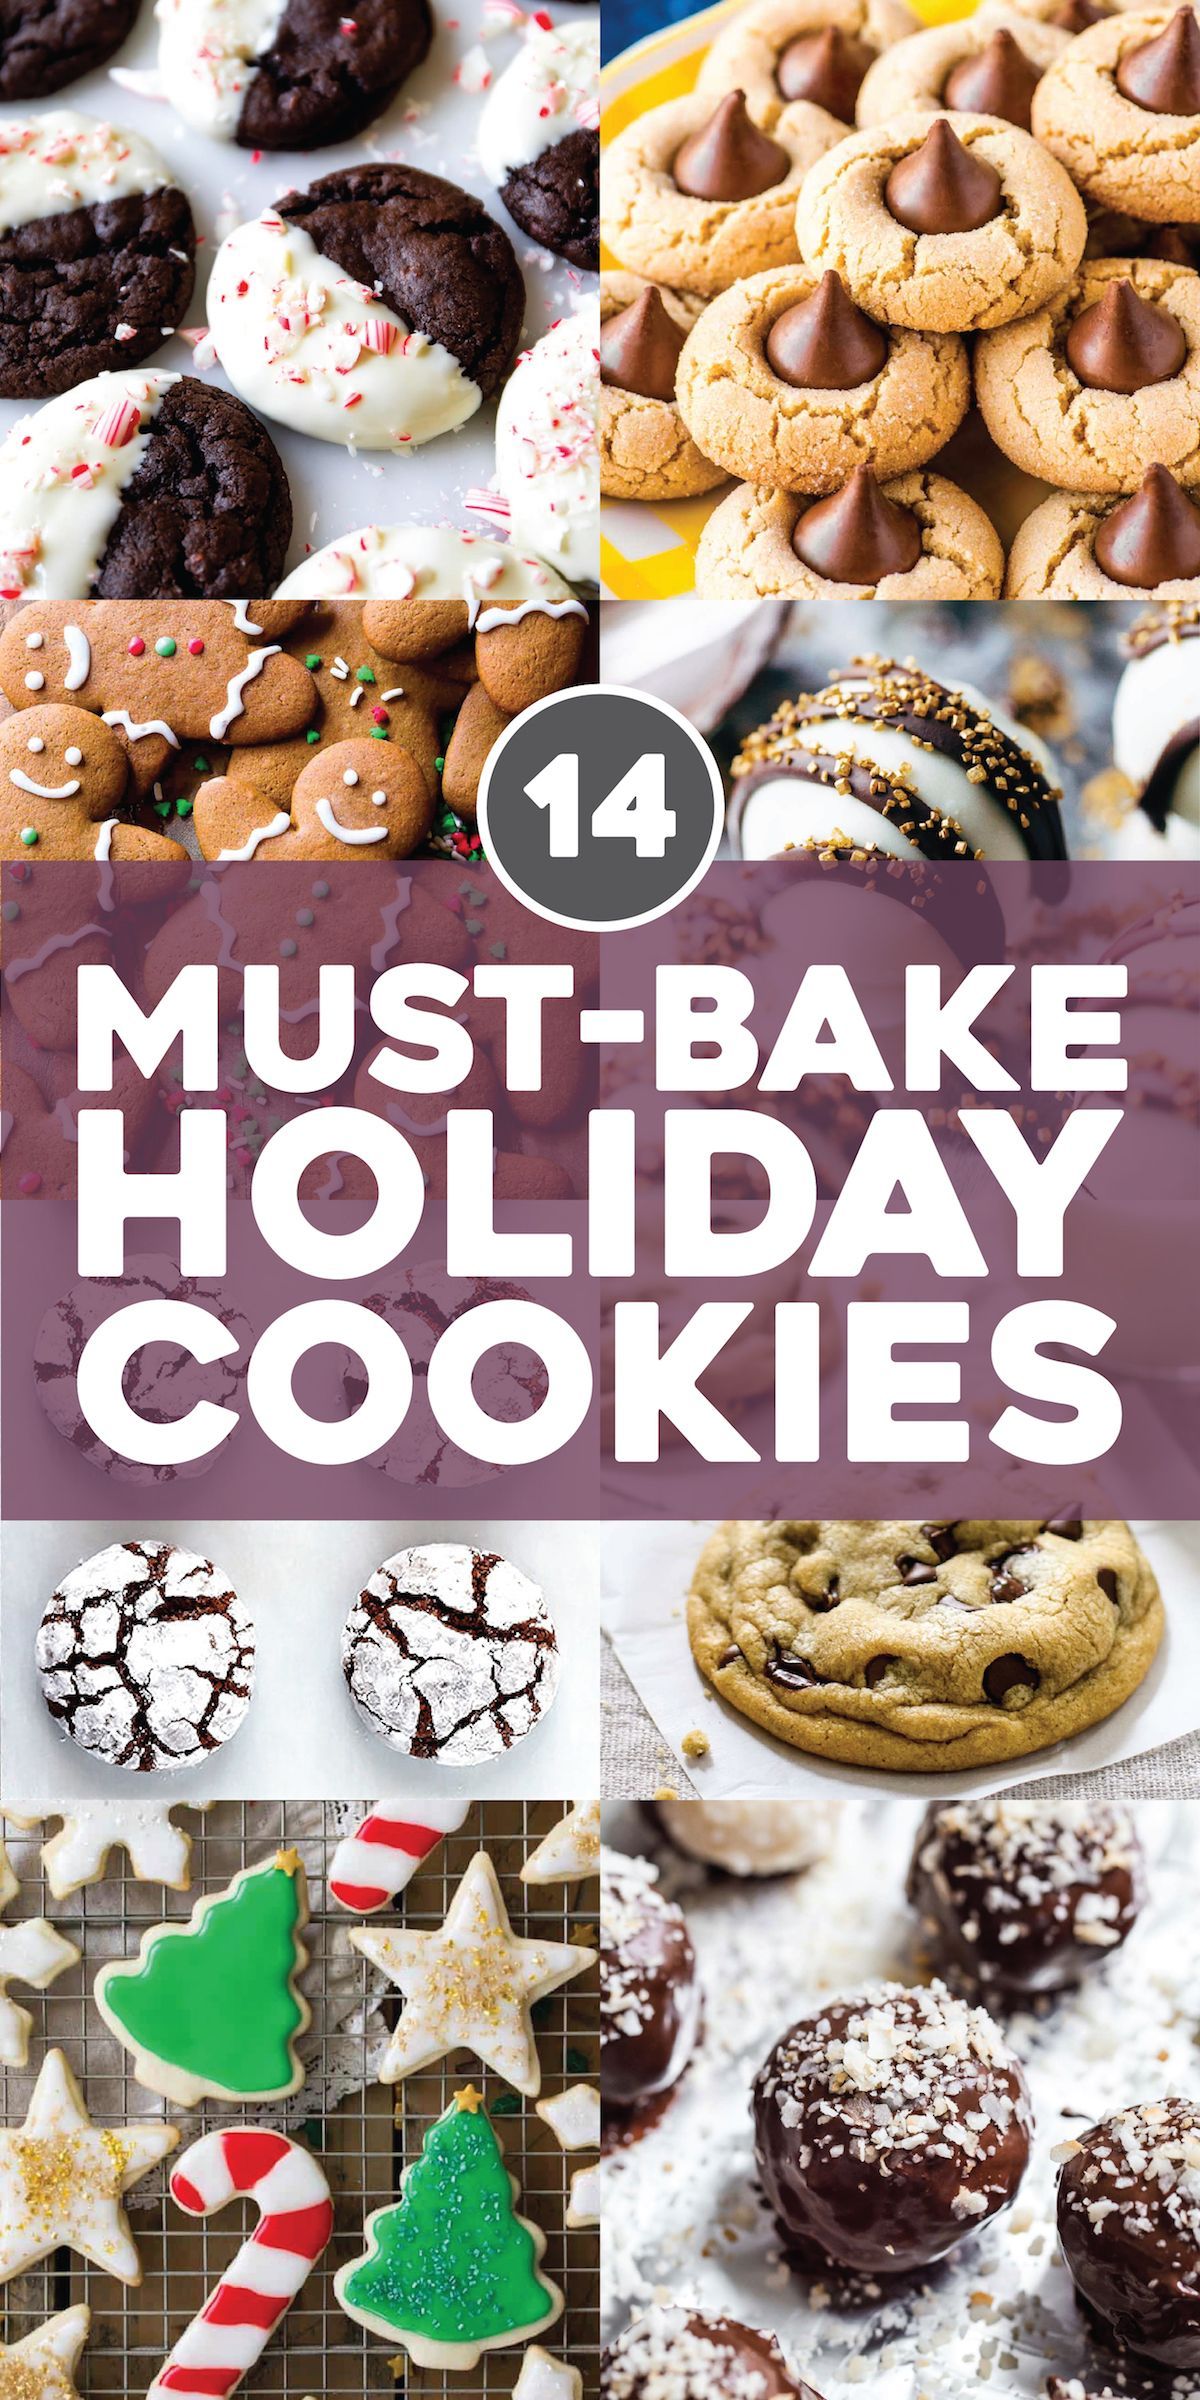 17 holiday Cookies recipes ideas